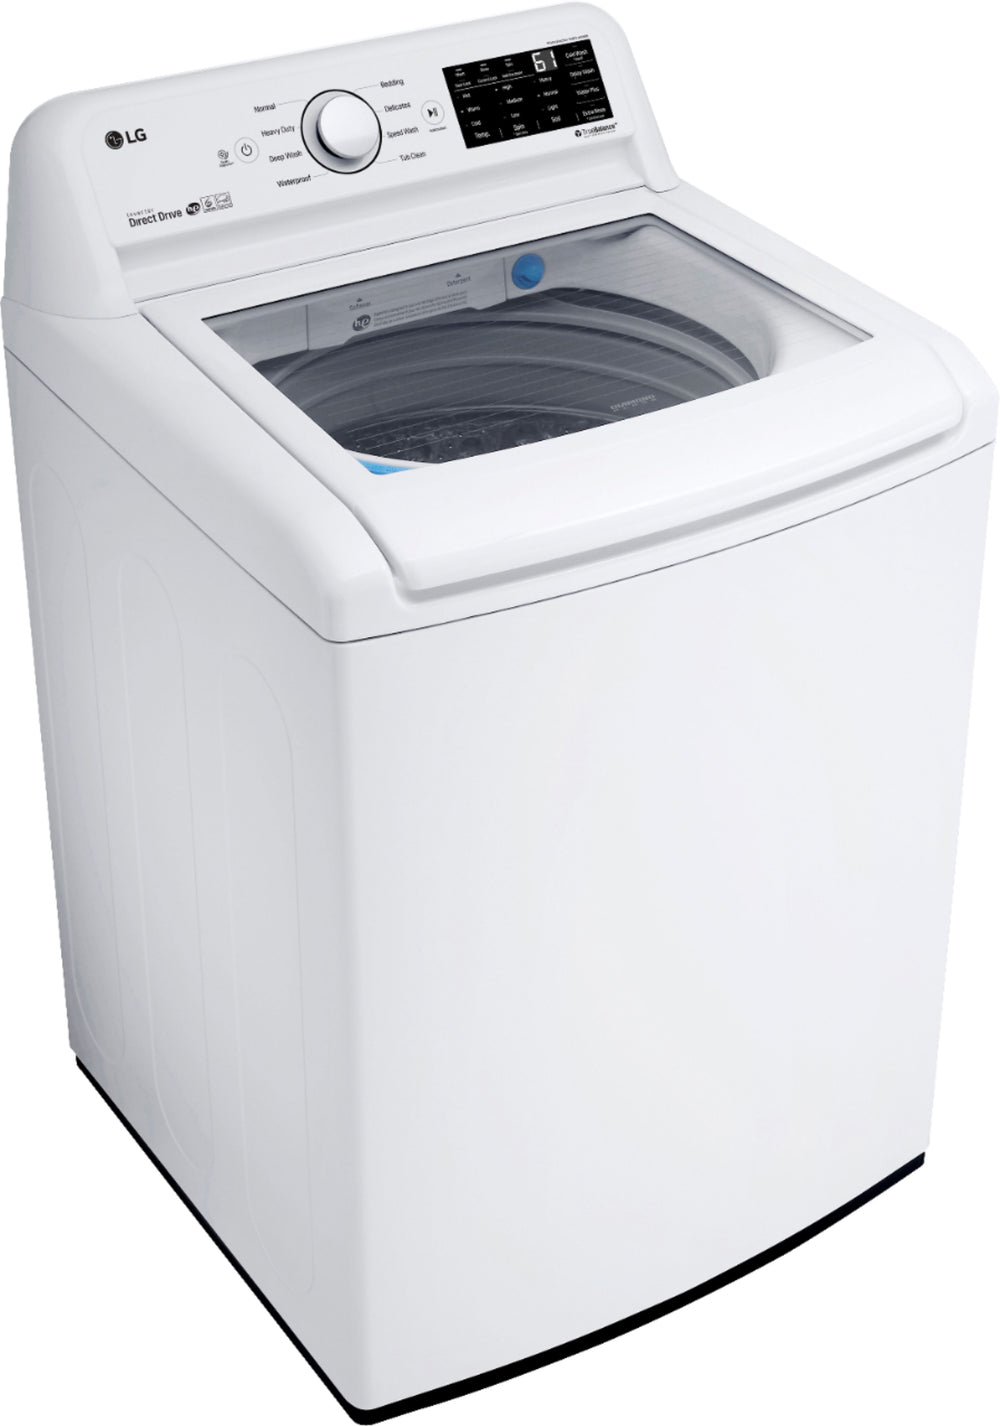 LG - 4.5 Cu. Ft. High-Efficiency Top-Load Washer with TurboDrum Technology - White_1